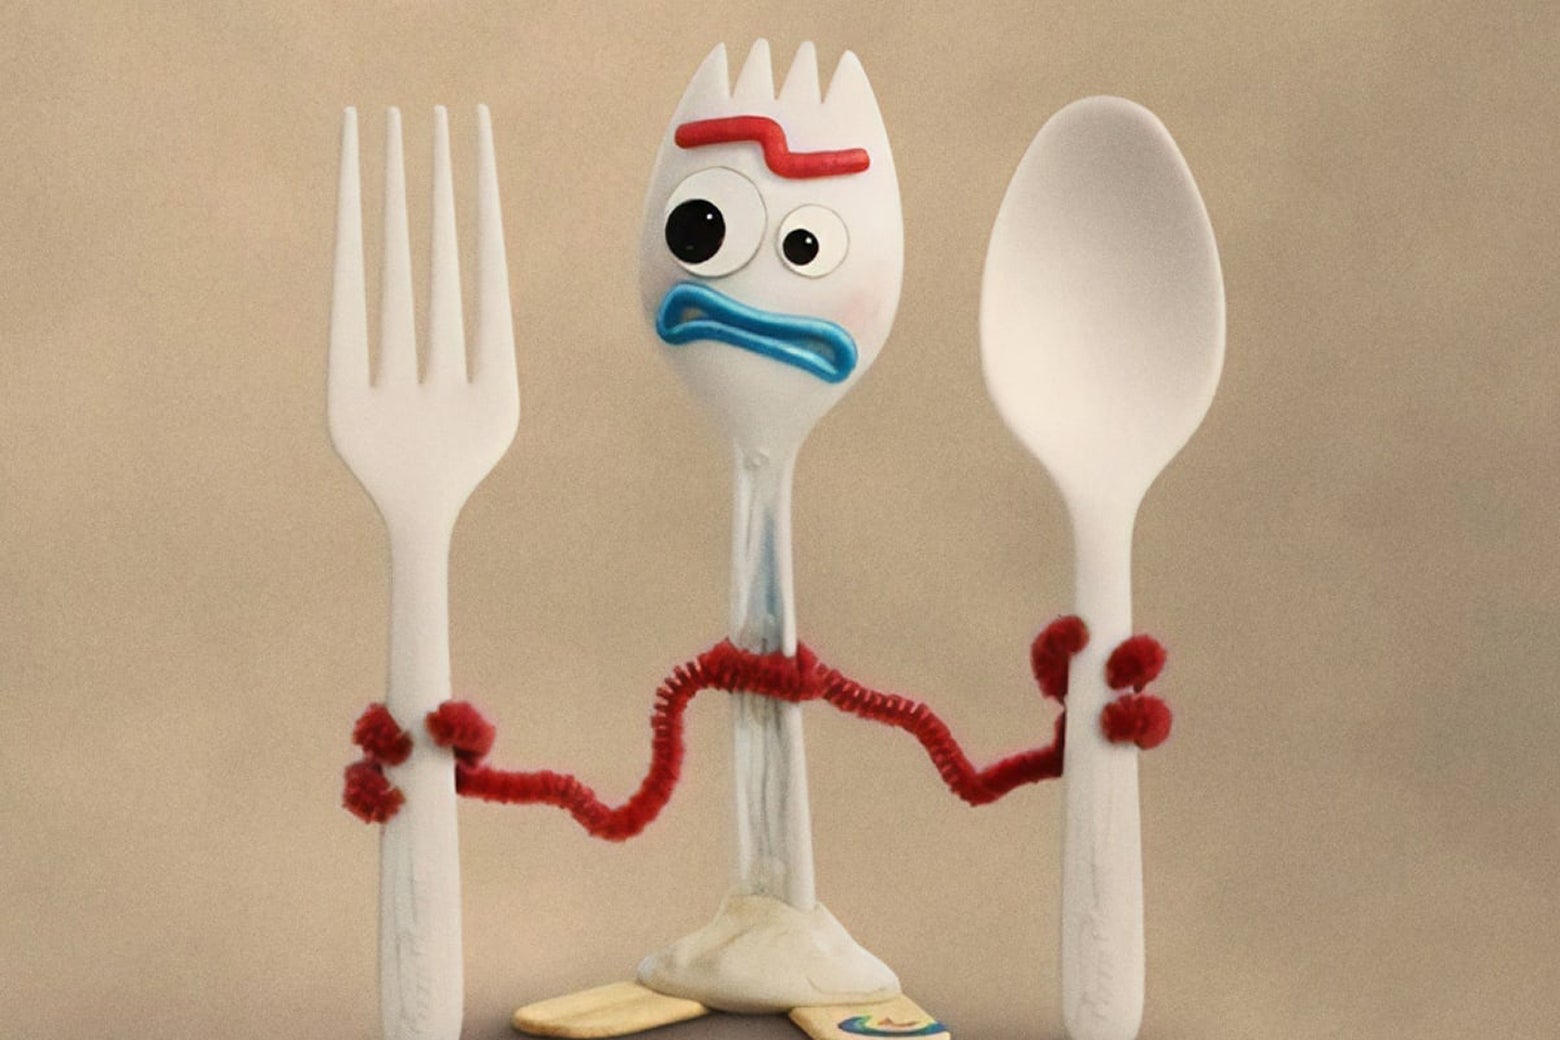 Toy Story 4: Forky has horrifying metaphysical implications for